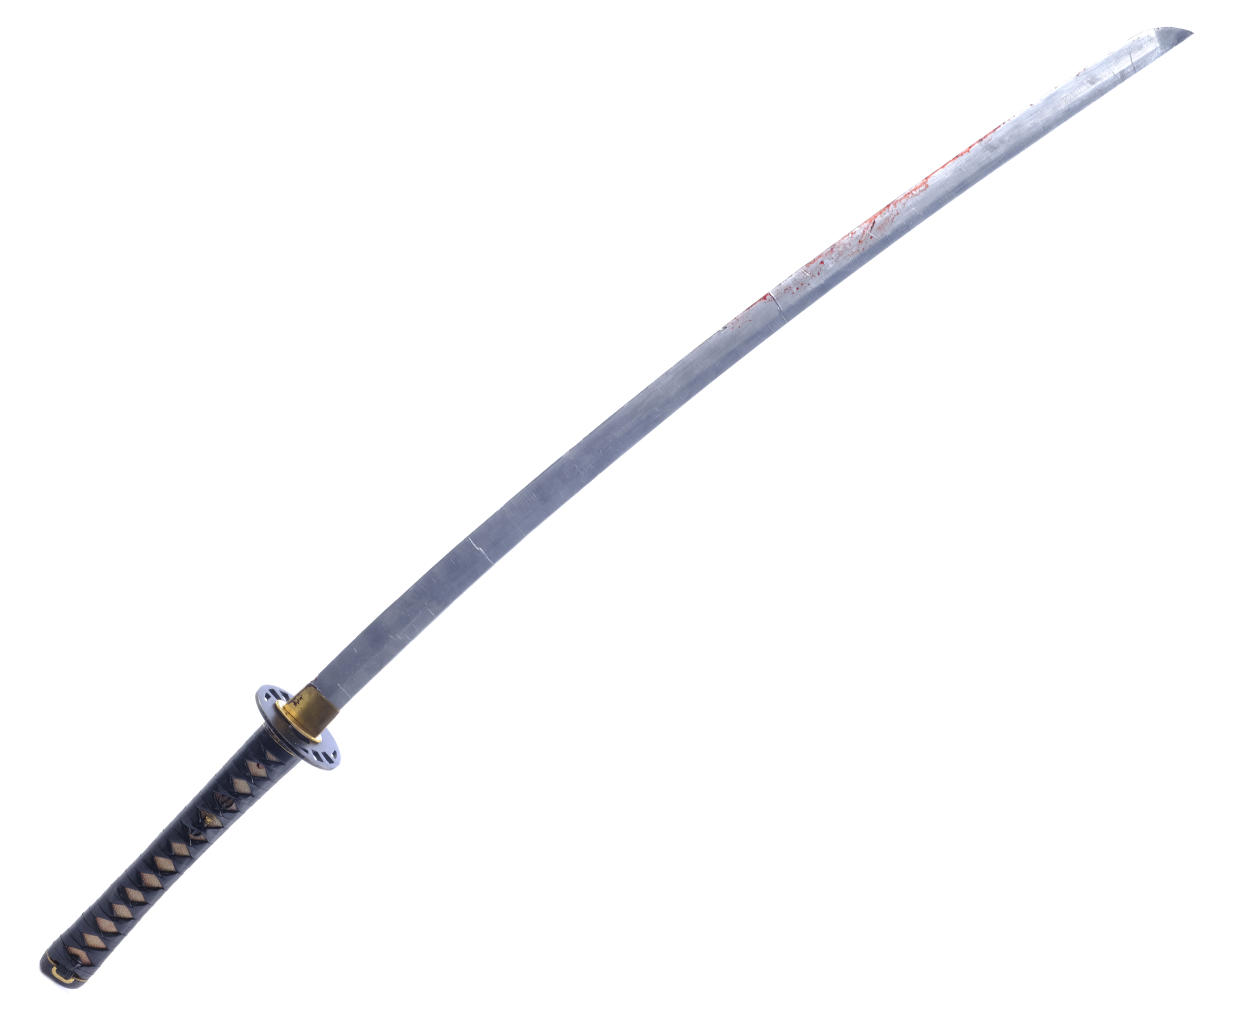 Other well known objects up for auction include Uma Thurman’s bloody samurai sword from Kill Bill (Propstore/PA)